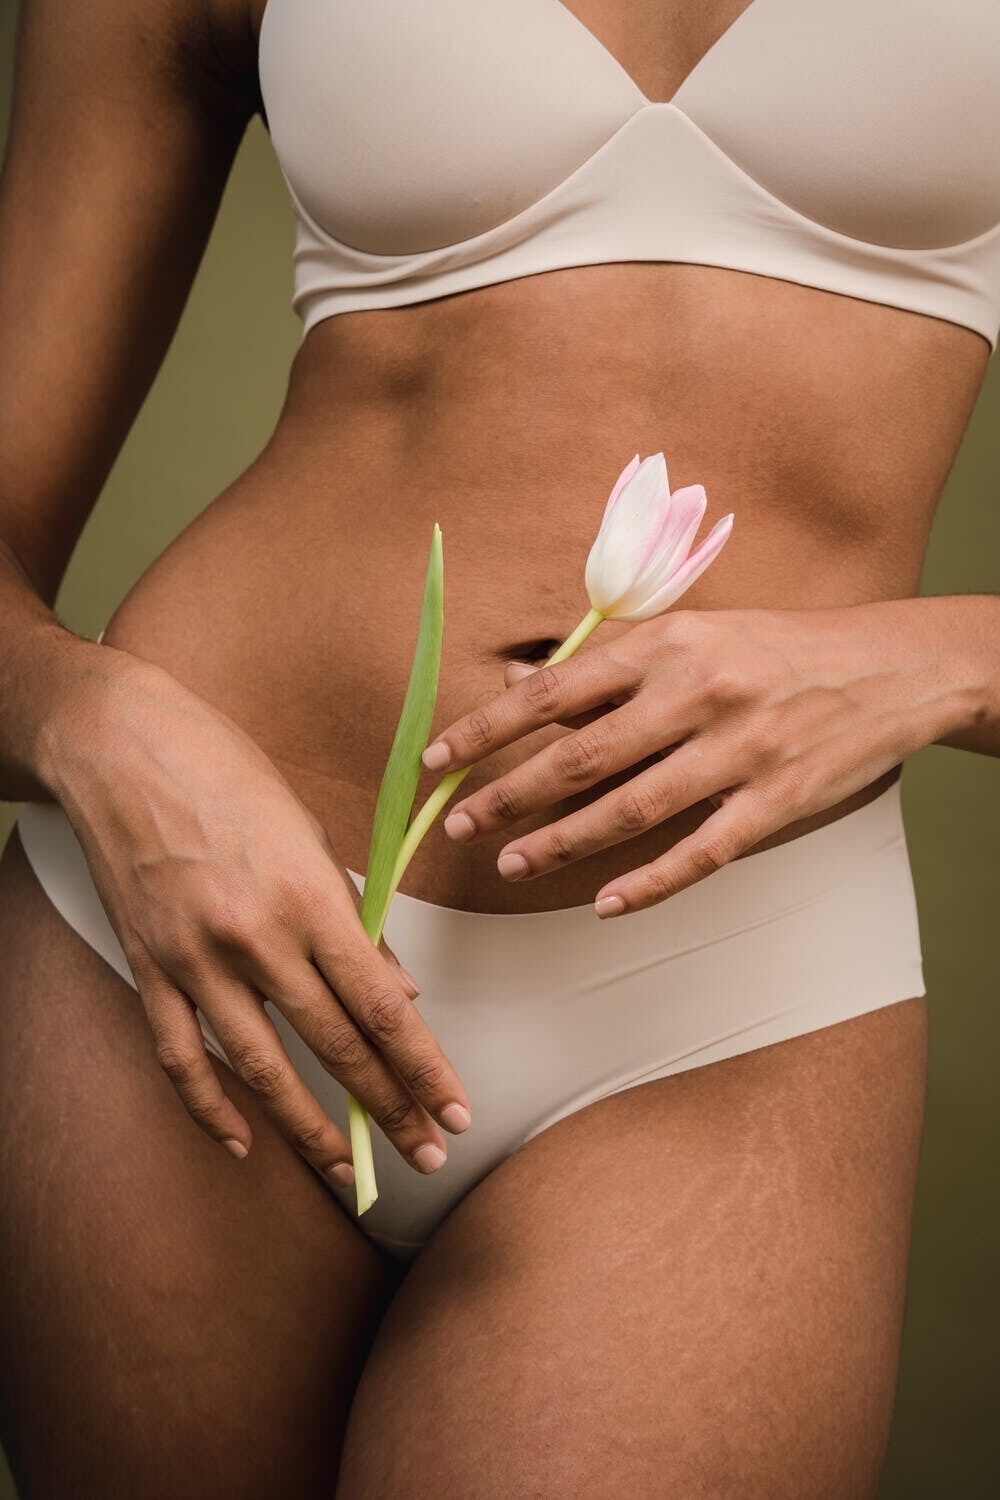 Most girls consider stretch marks to be a flaw